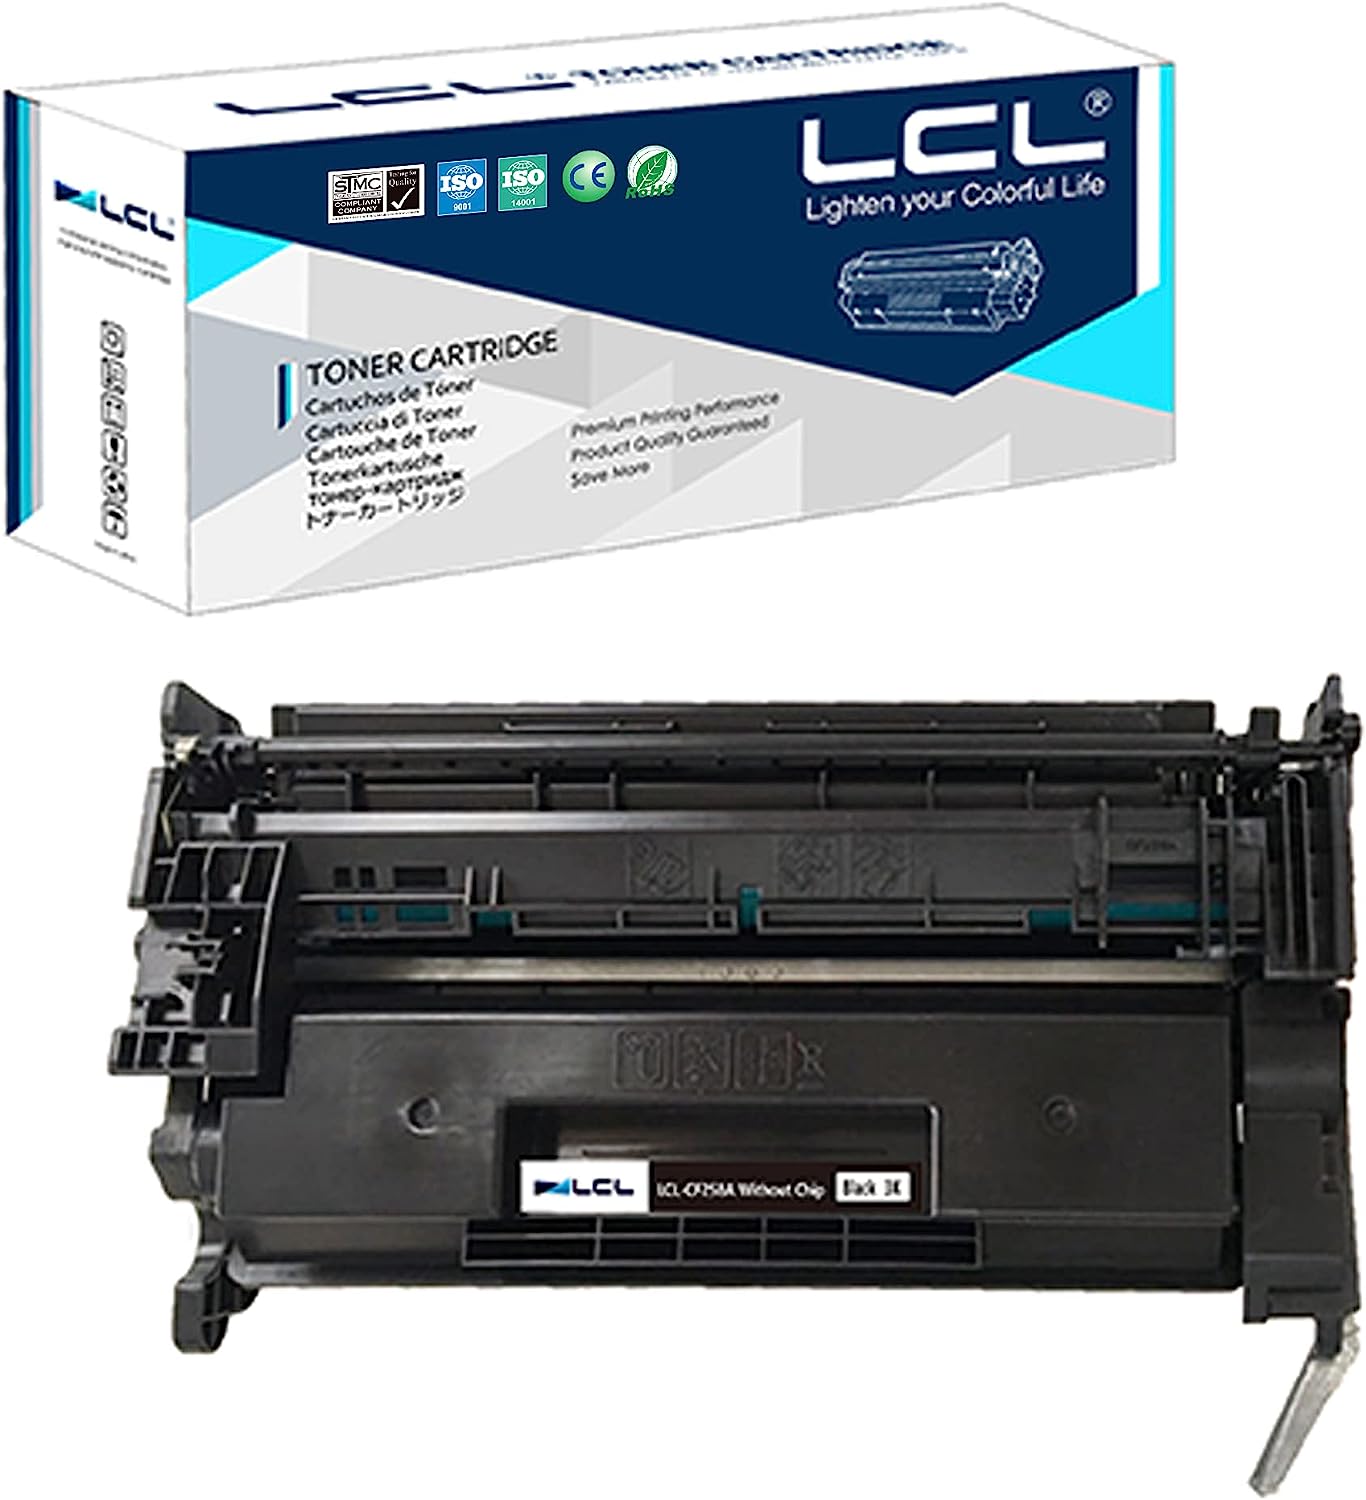 printer without cartridges review